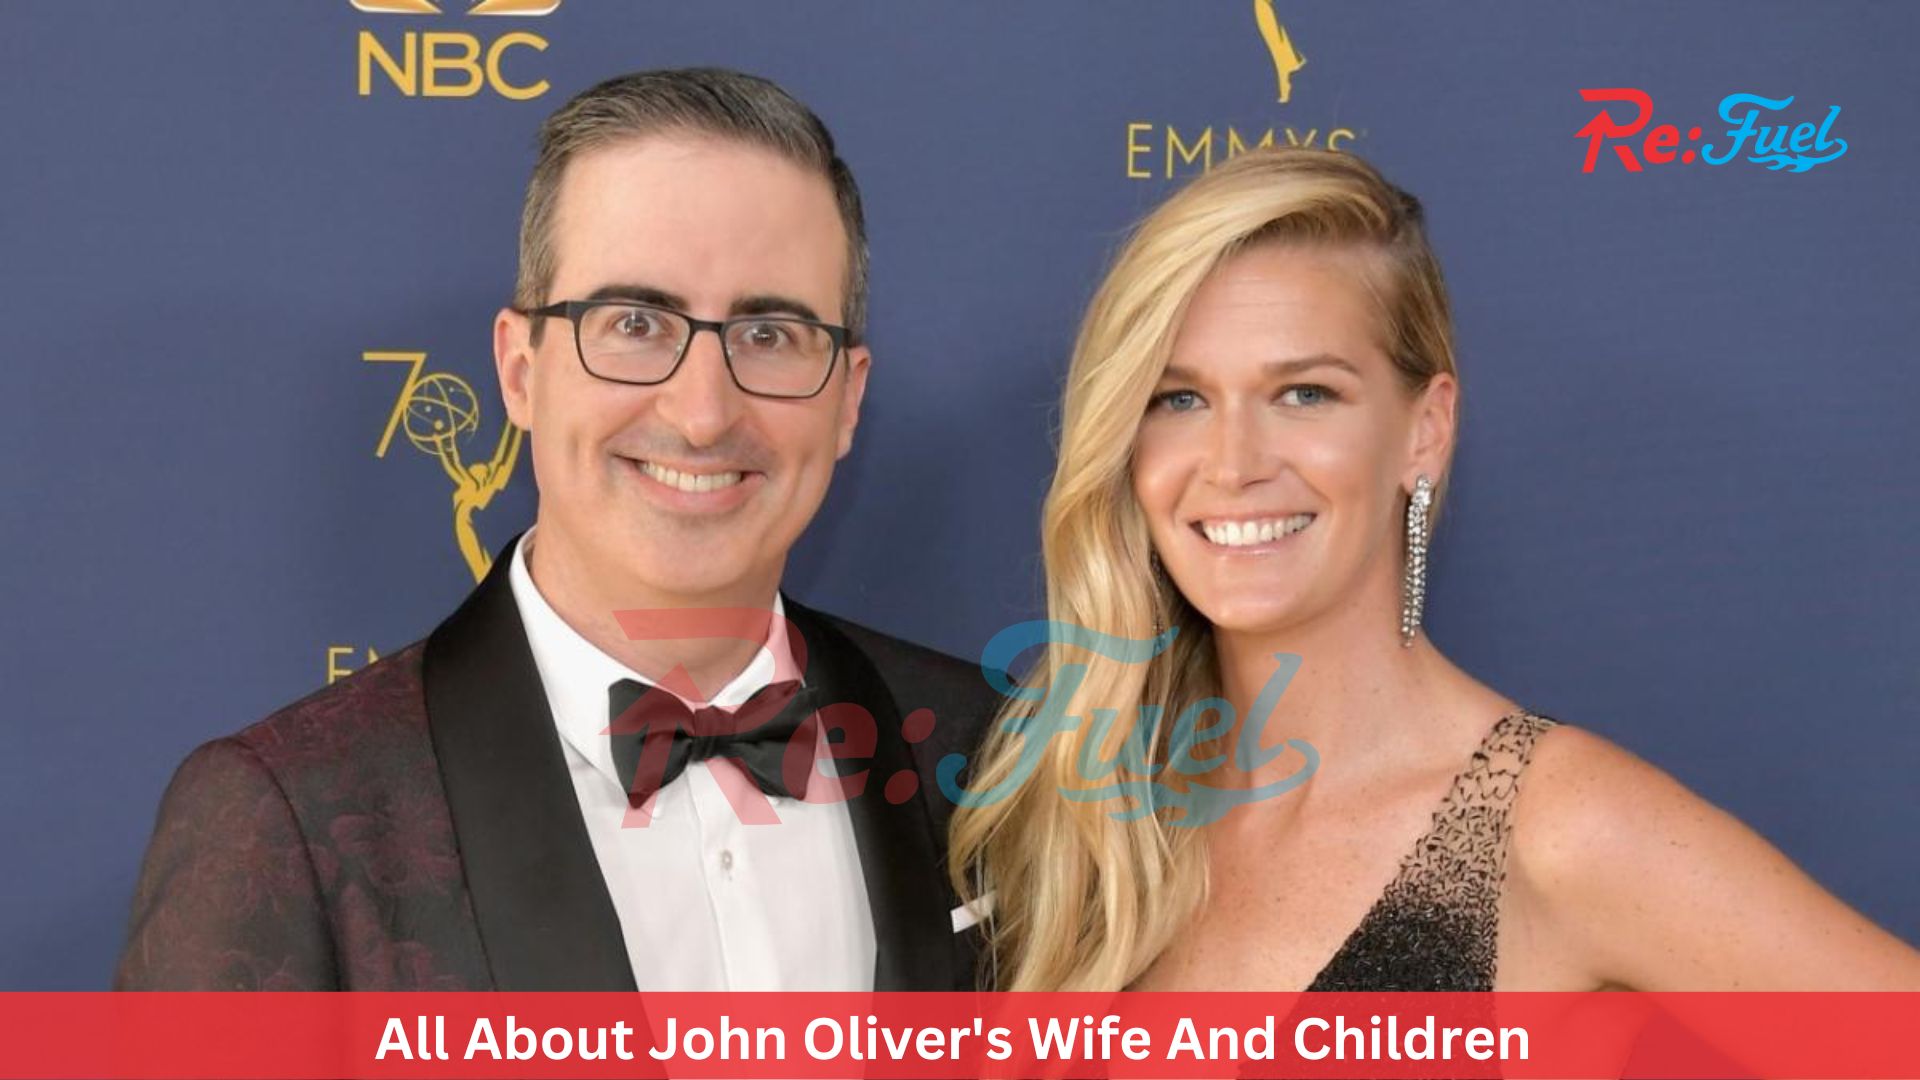 All About John Oliver's Wife And Children